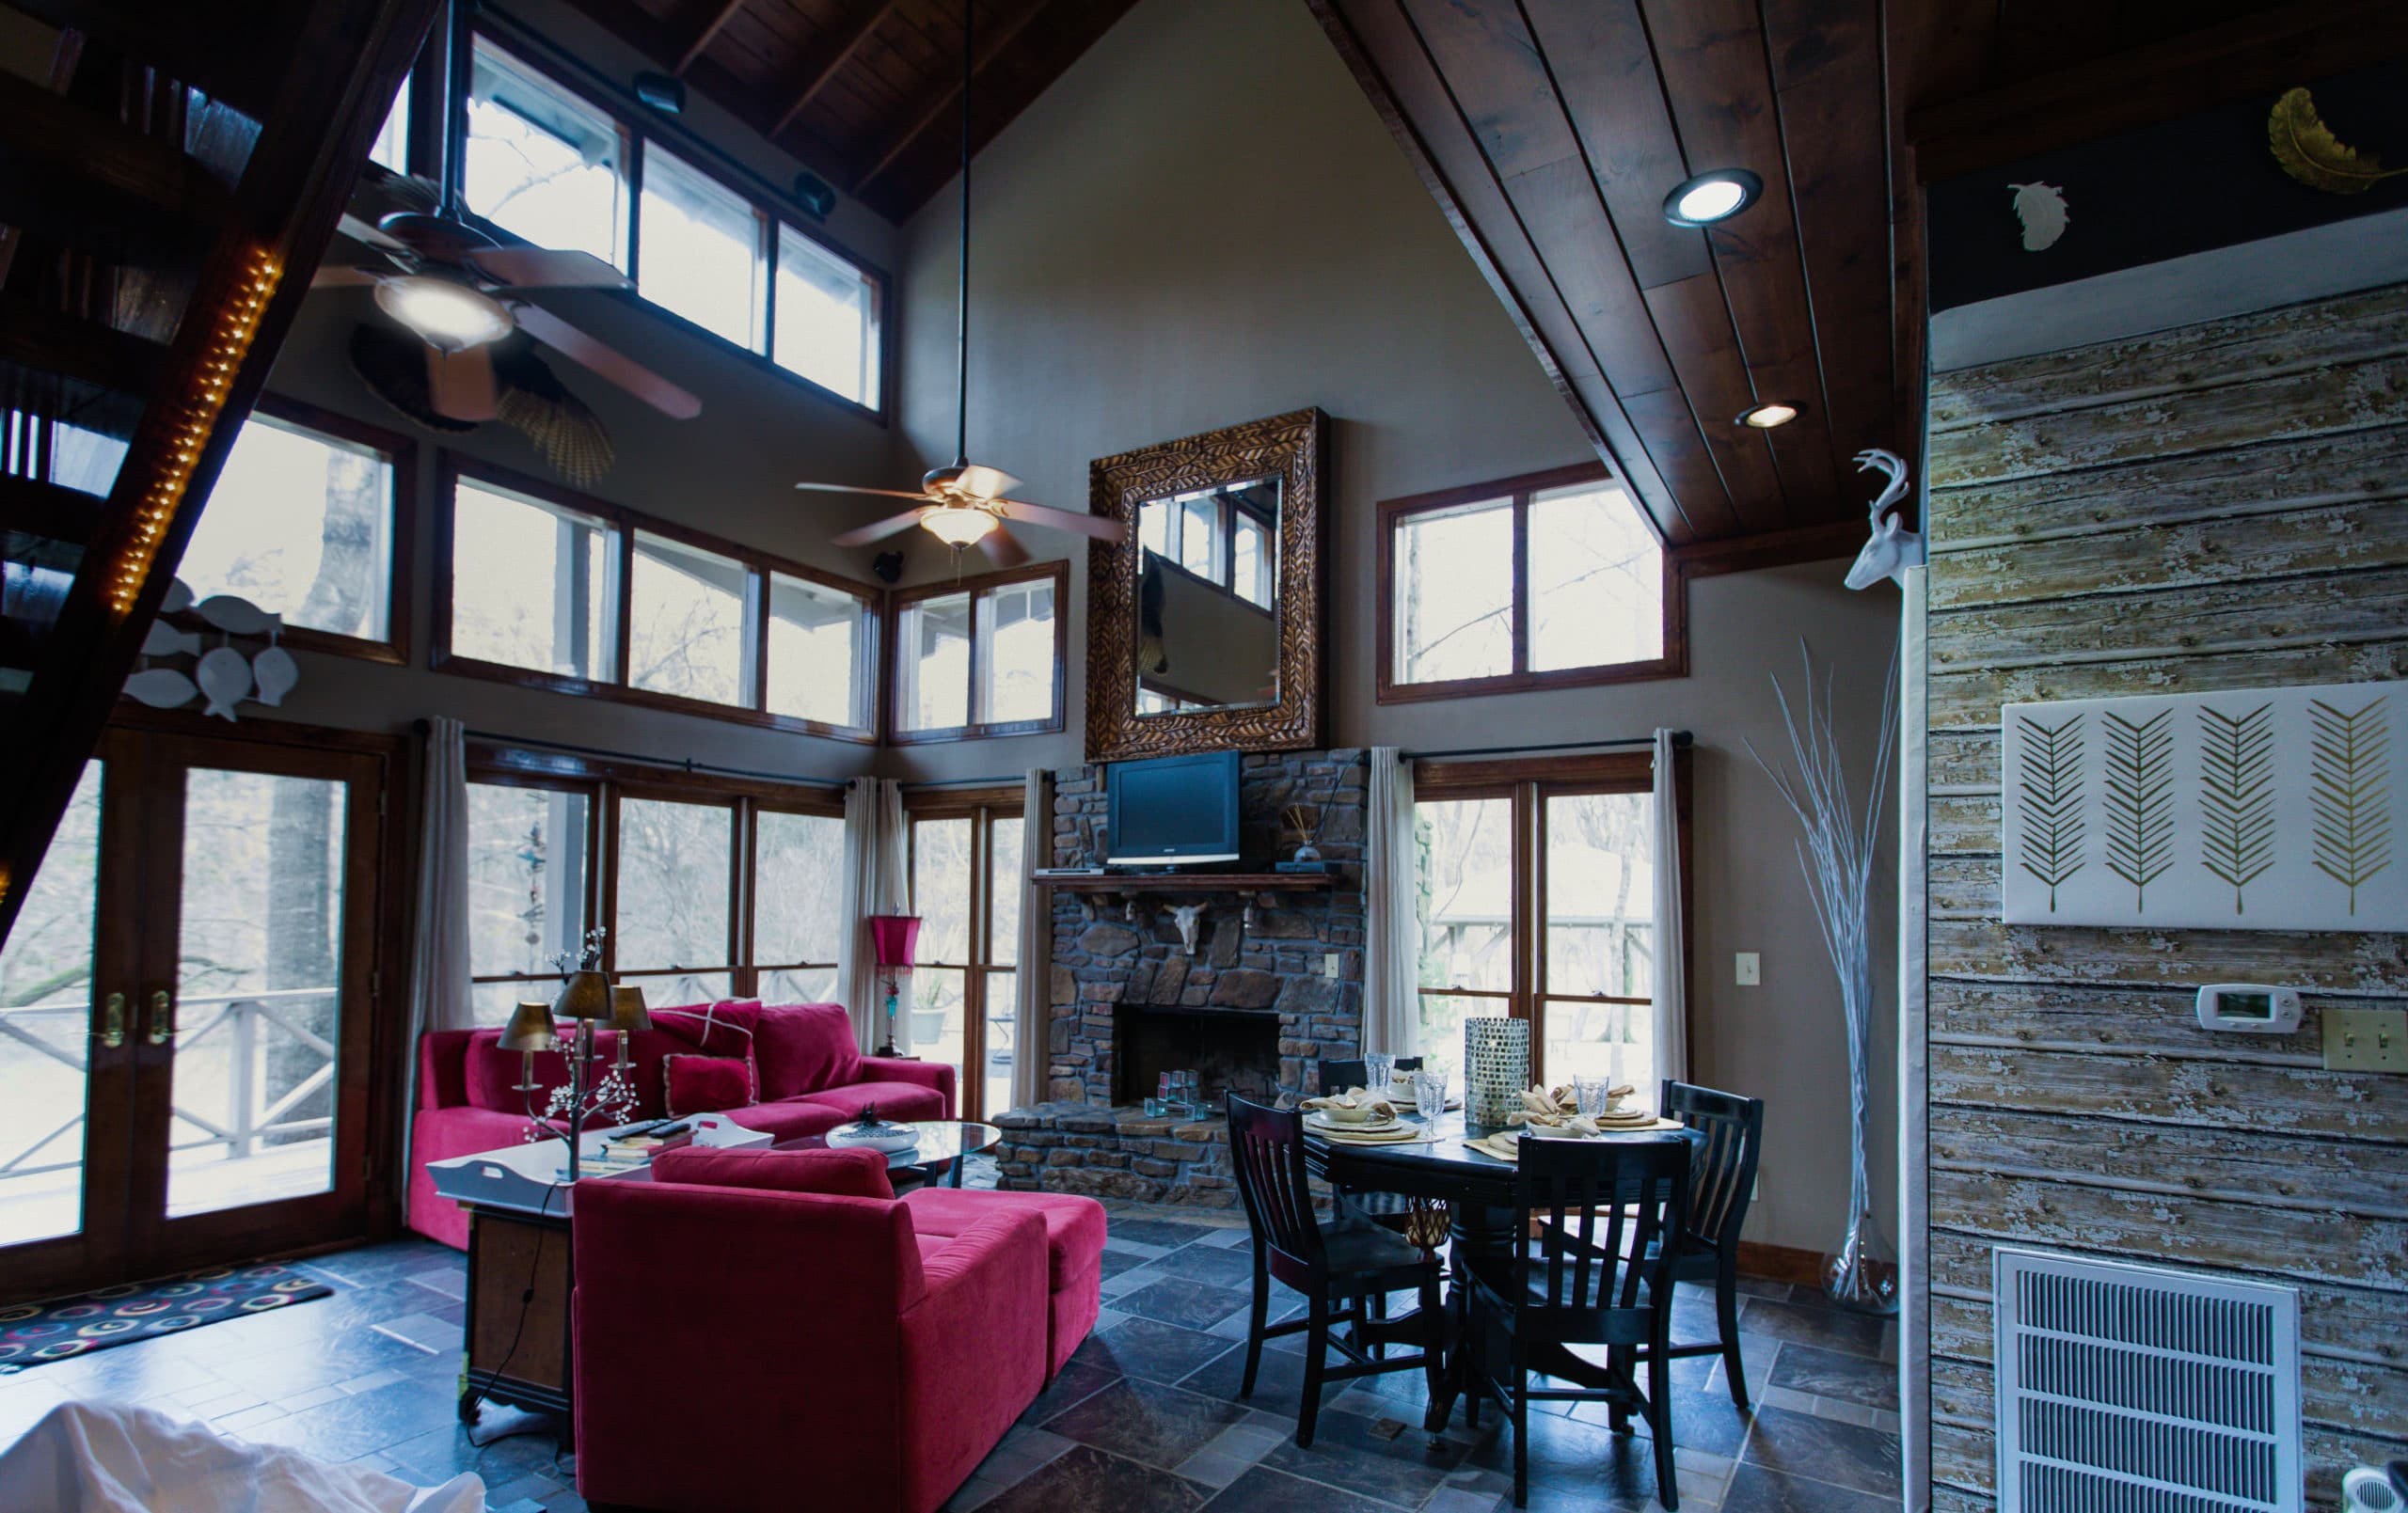 rivers-bend-cabin-04-riverside-retreat-living-room-wall-of-windows-fireplace-red-furniture-dining-table-standing-view-scaled